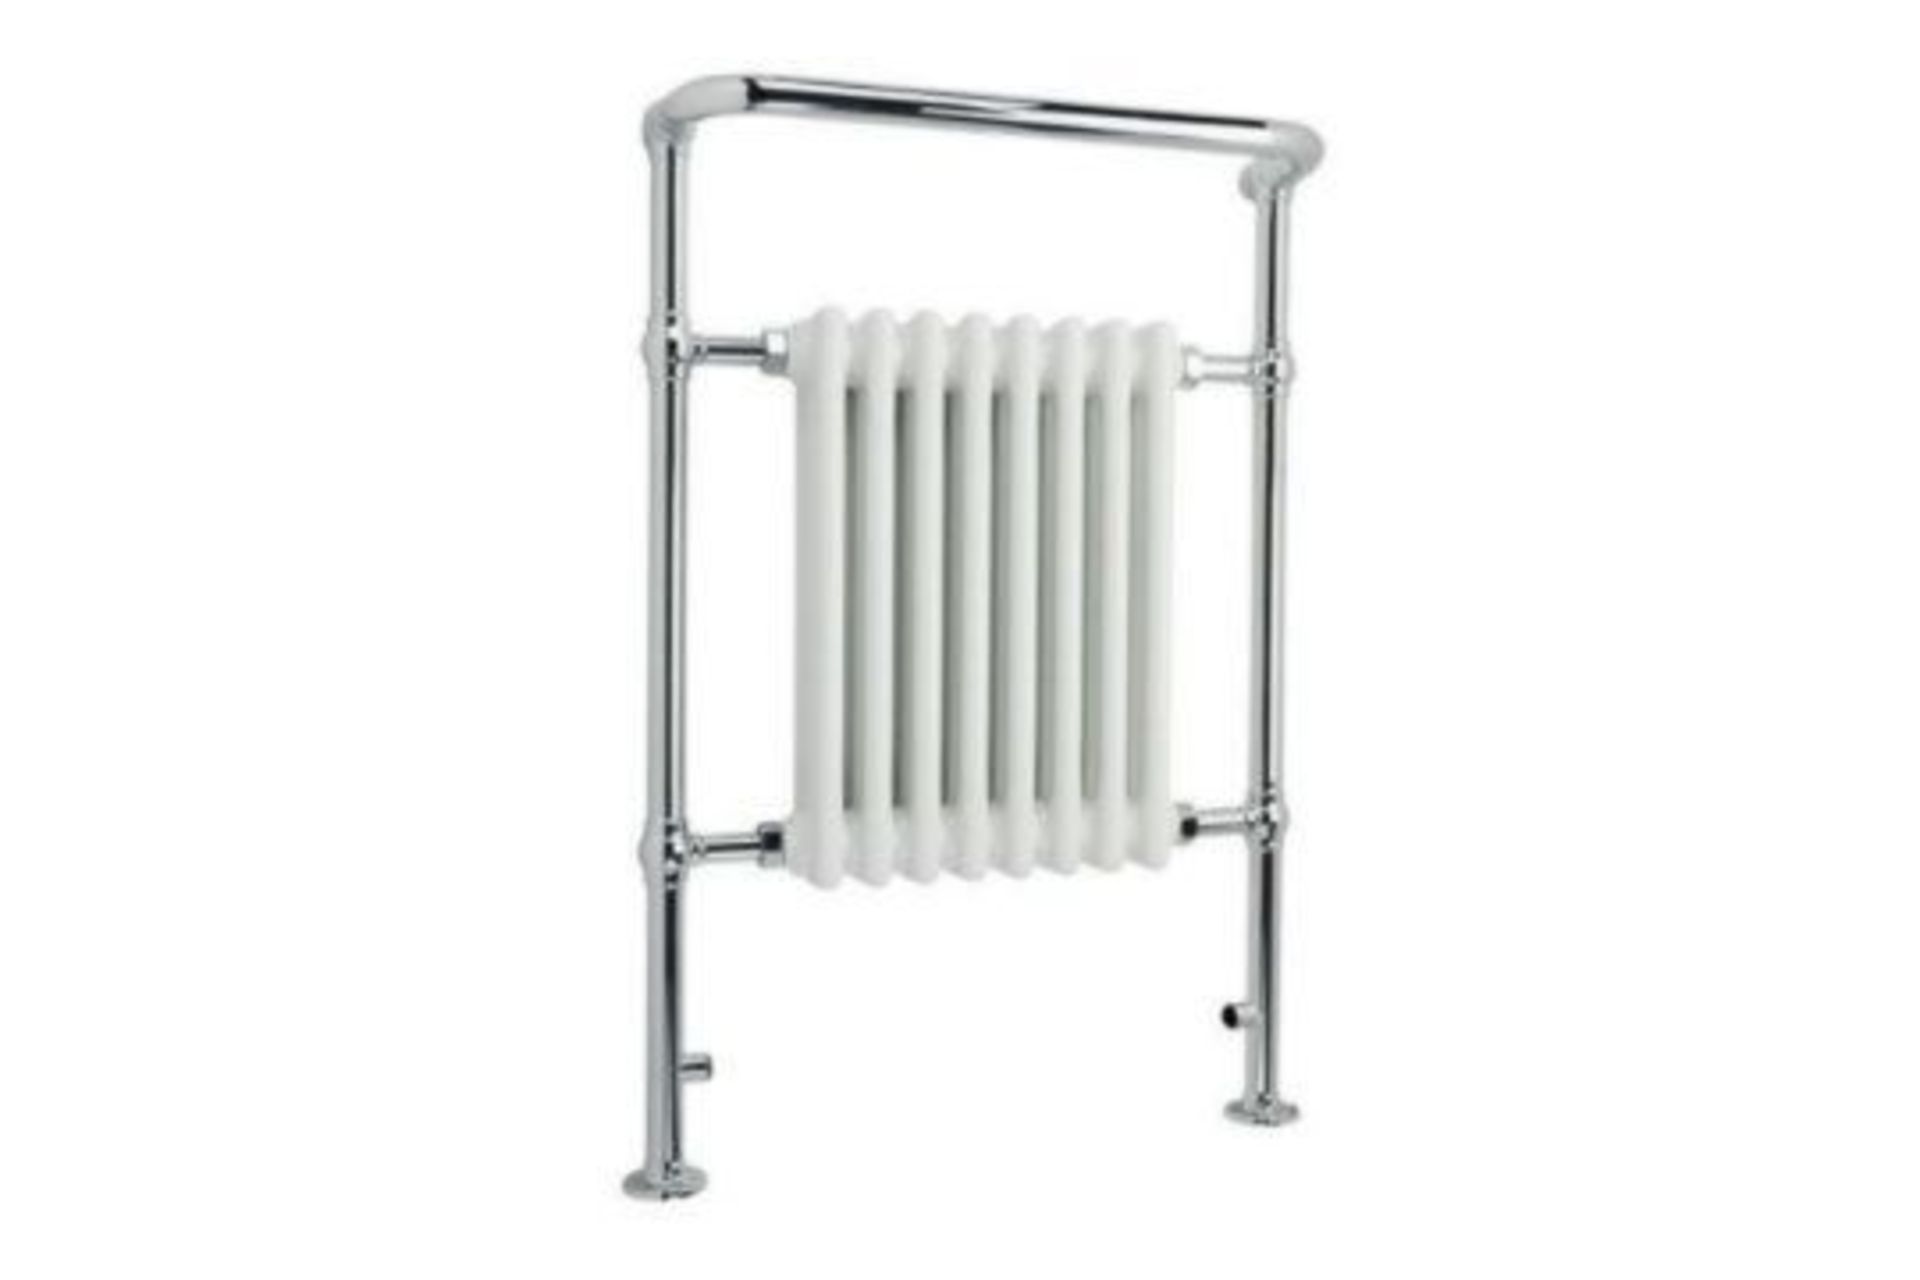 NEW & BOXED 952x659mm Large Traditional White Premium Towel Rail Radiator.RRP £499.99.We love ... - Image 2 of 3